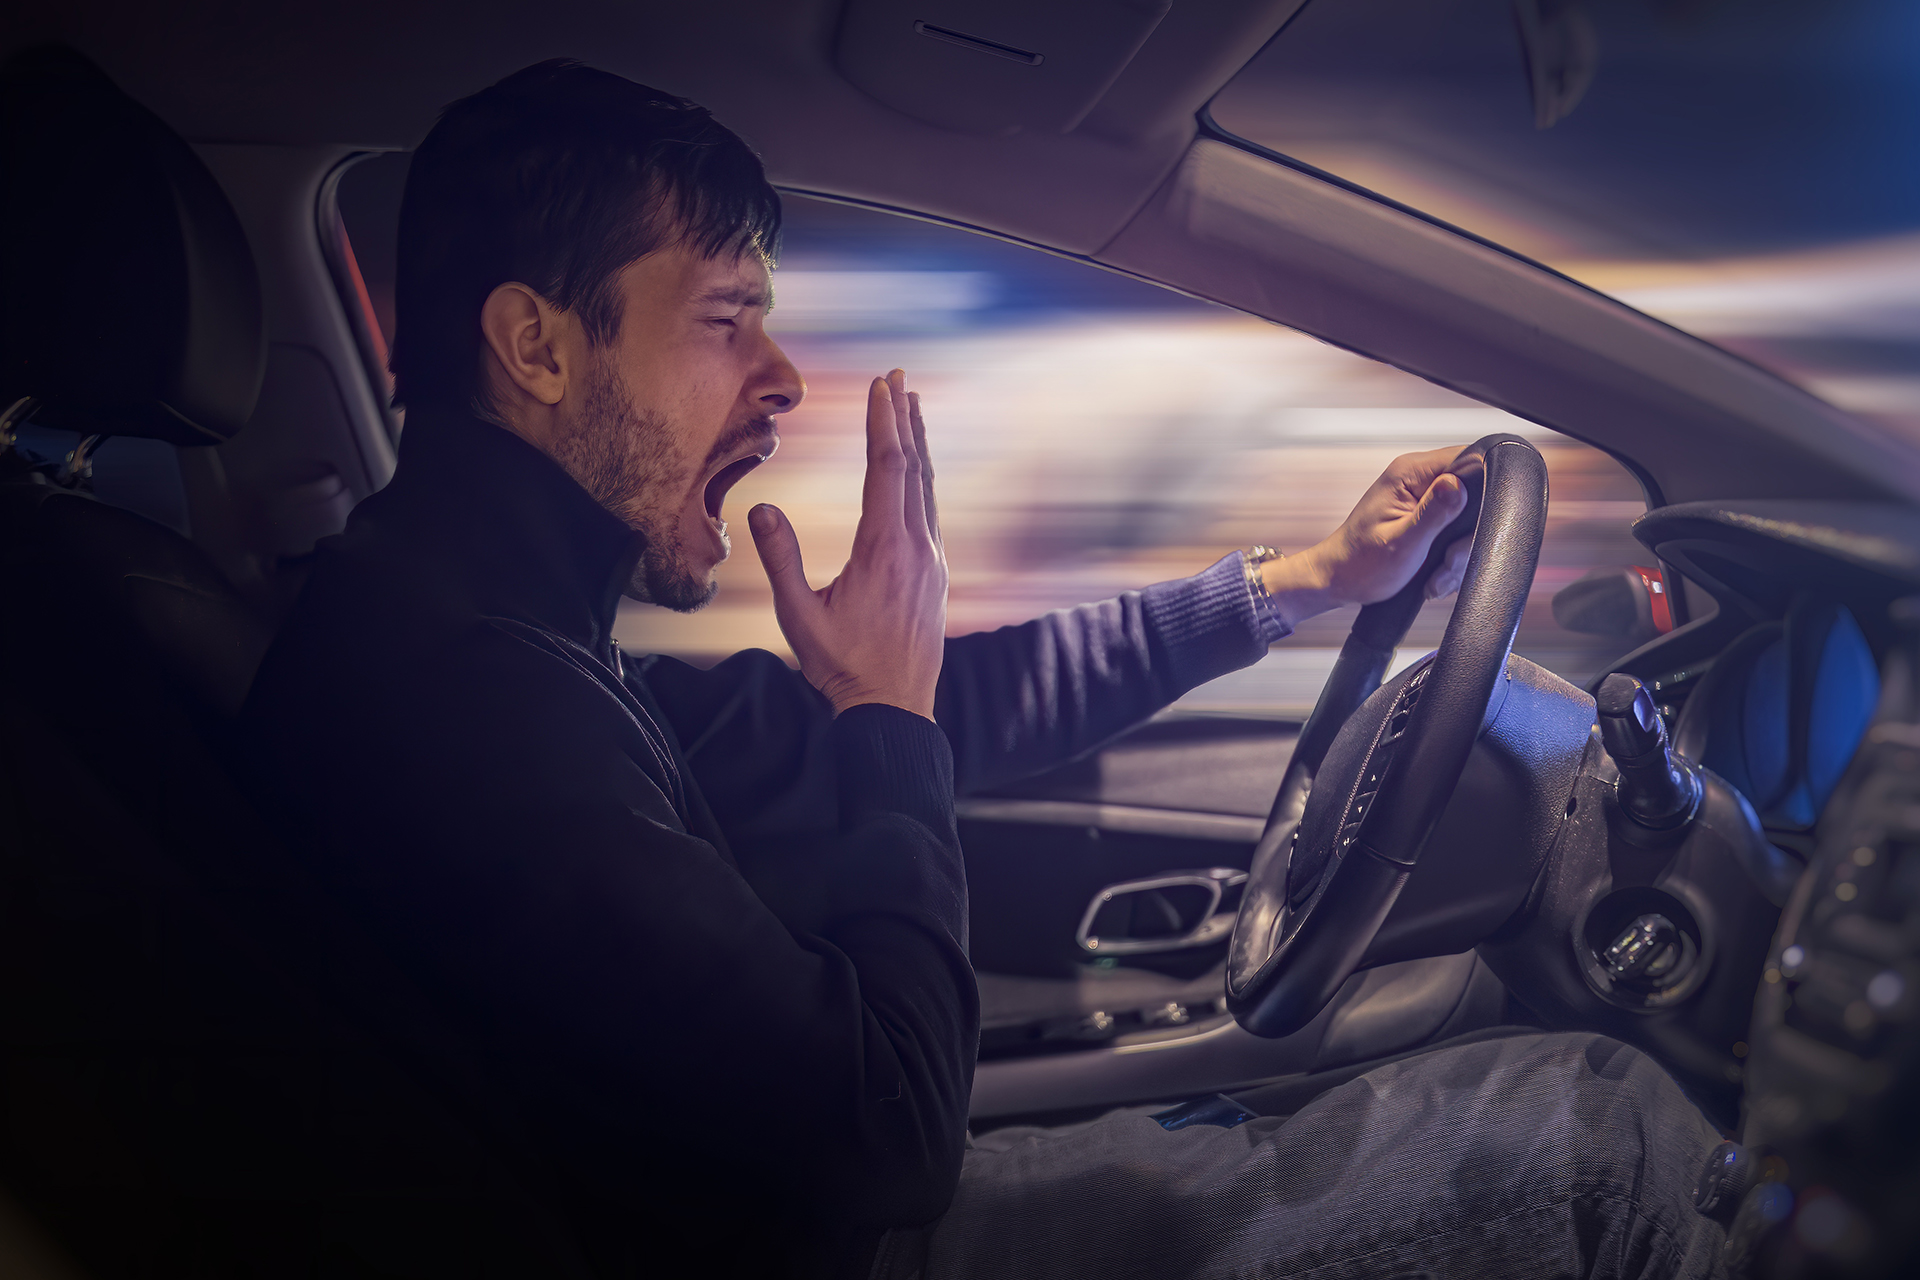 Driver notification on drowsiness, distraction, and yawning